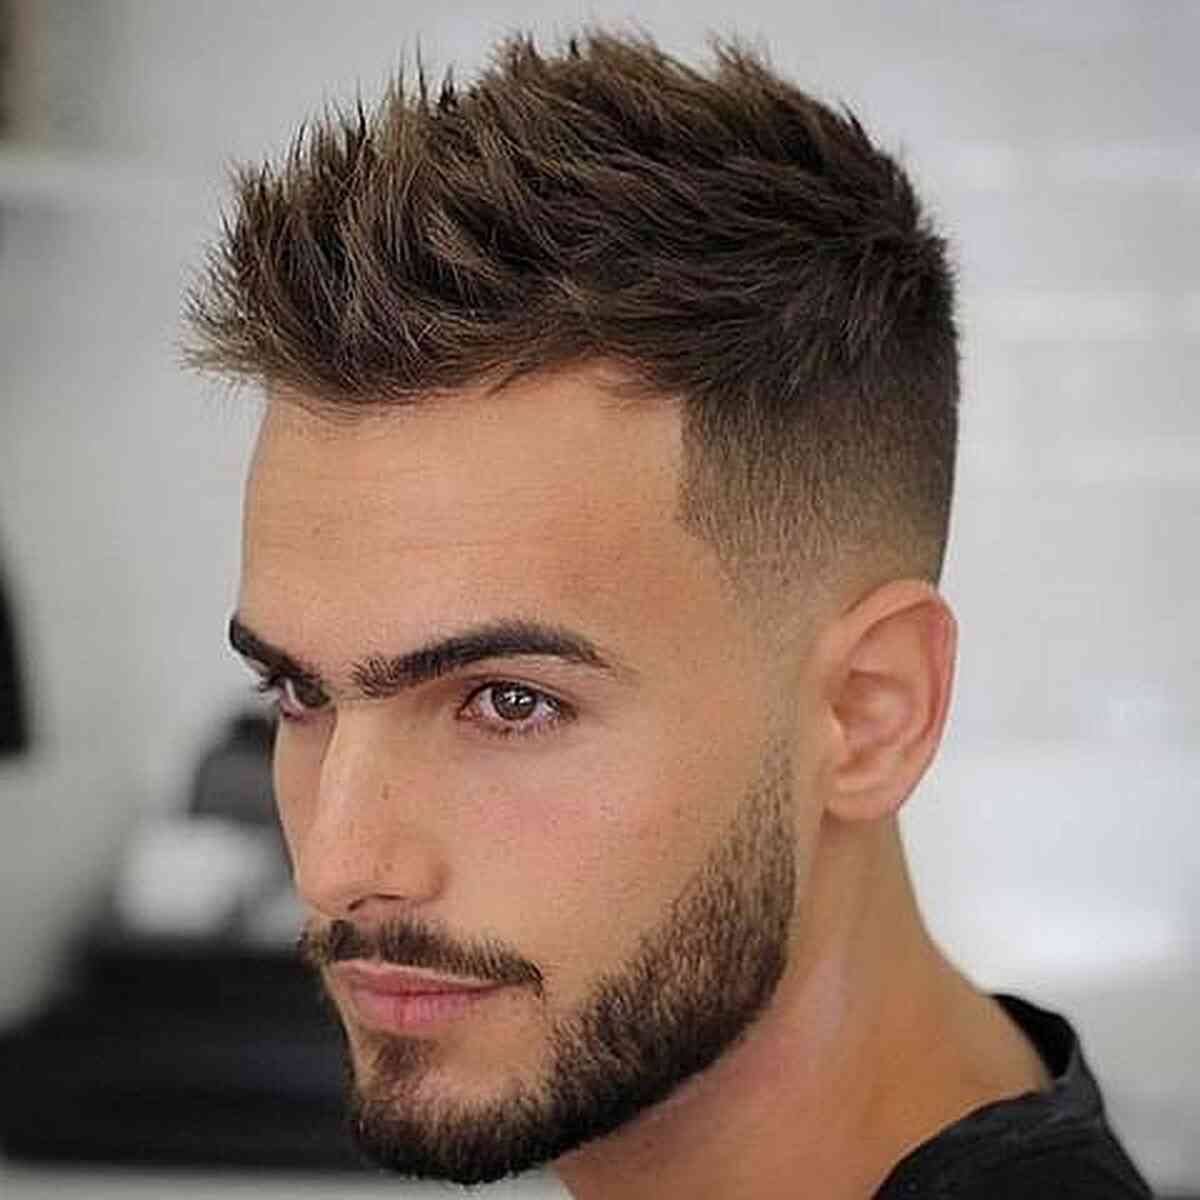 Hair Color for Men: 39 Examples Ranging from Vivids to Natural Hues